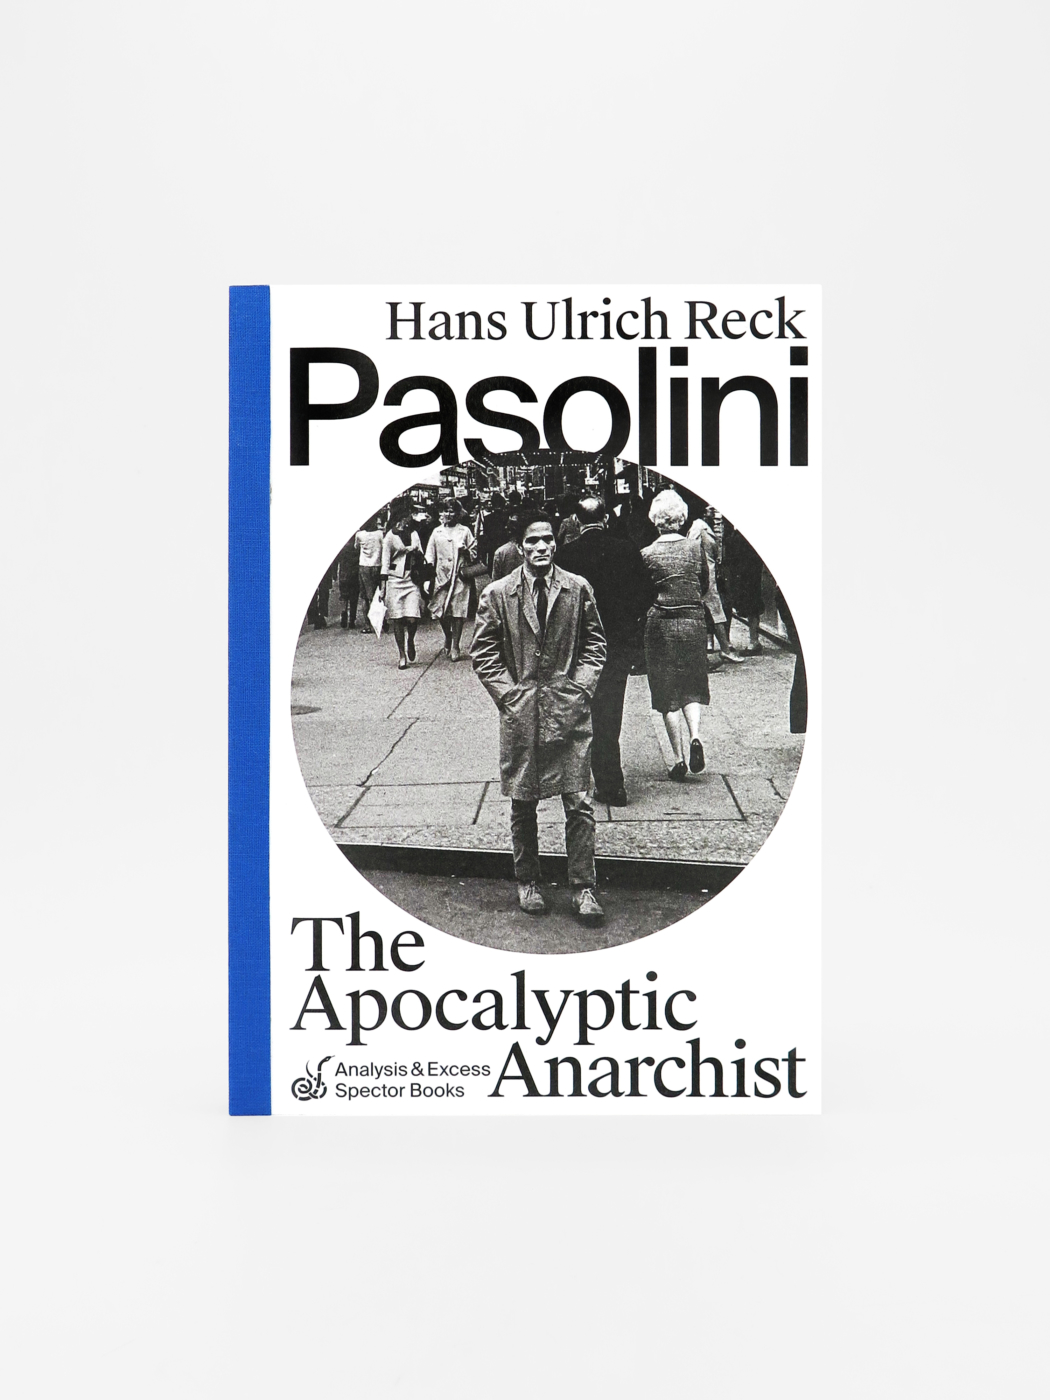 Hans Ulrich Reck, Pasolini: The Apocalyptic Anarchist